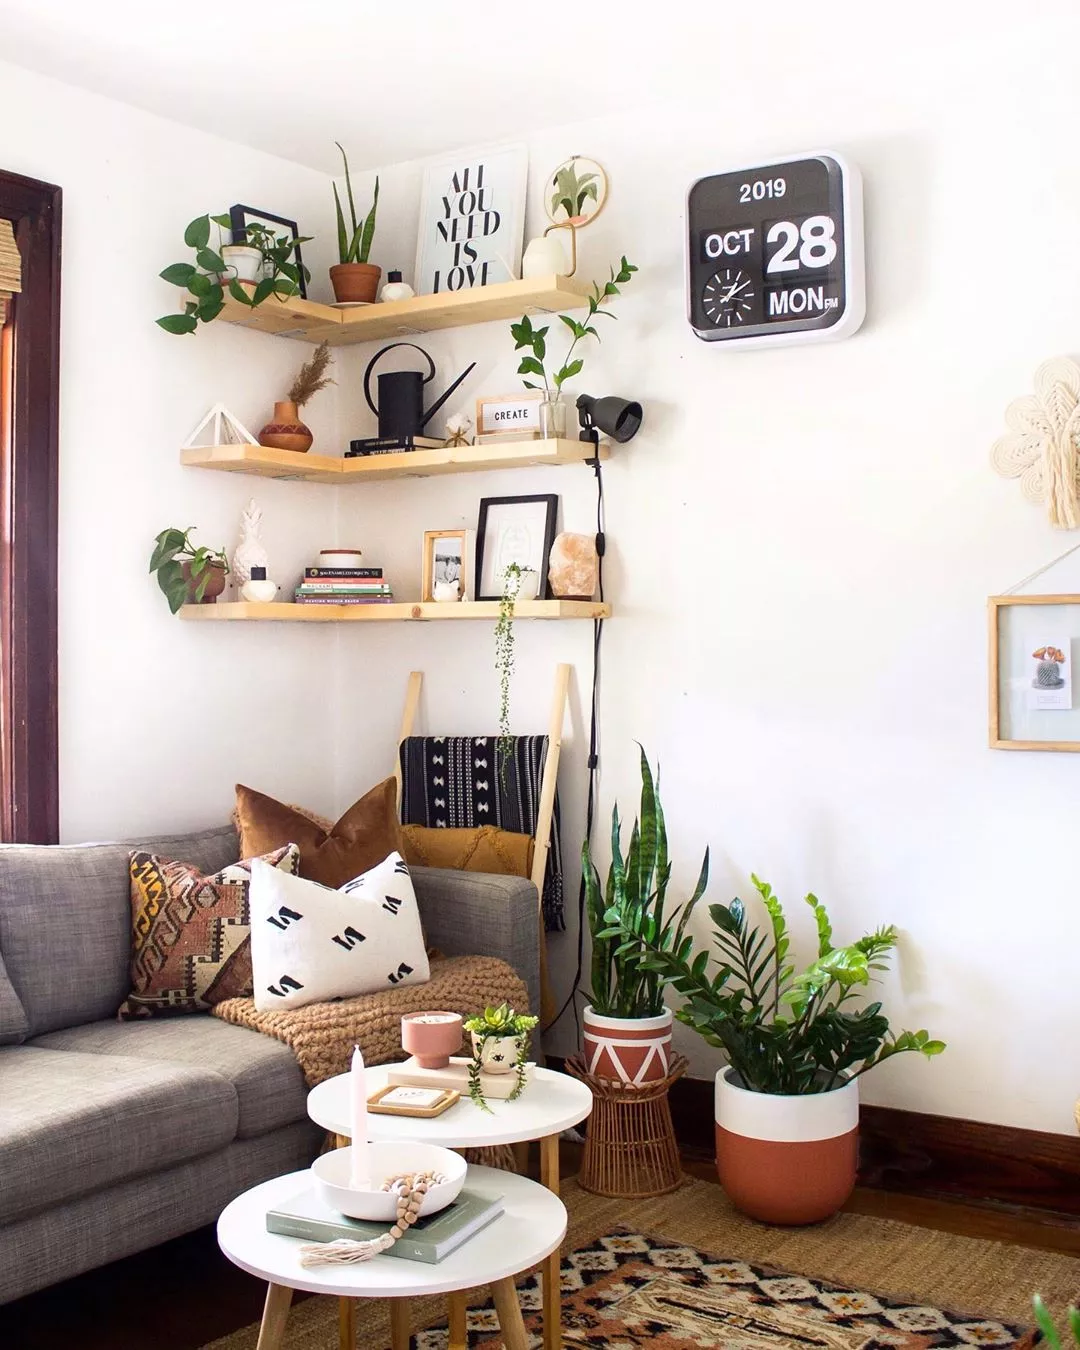 5 Ways to Maximize Small Spaces - Midwest Home